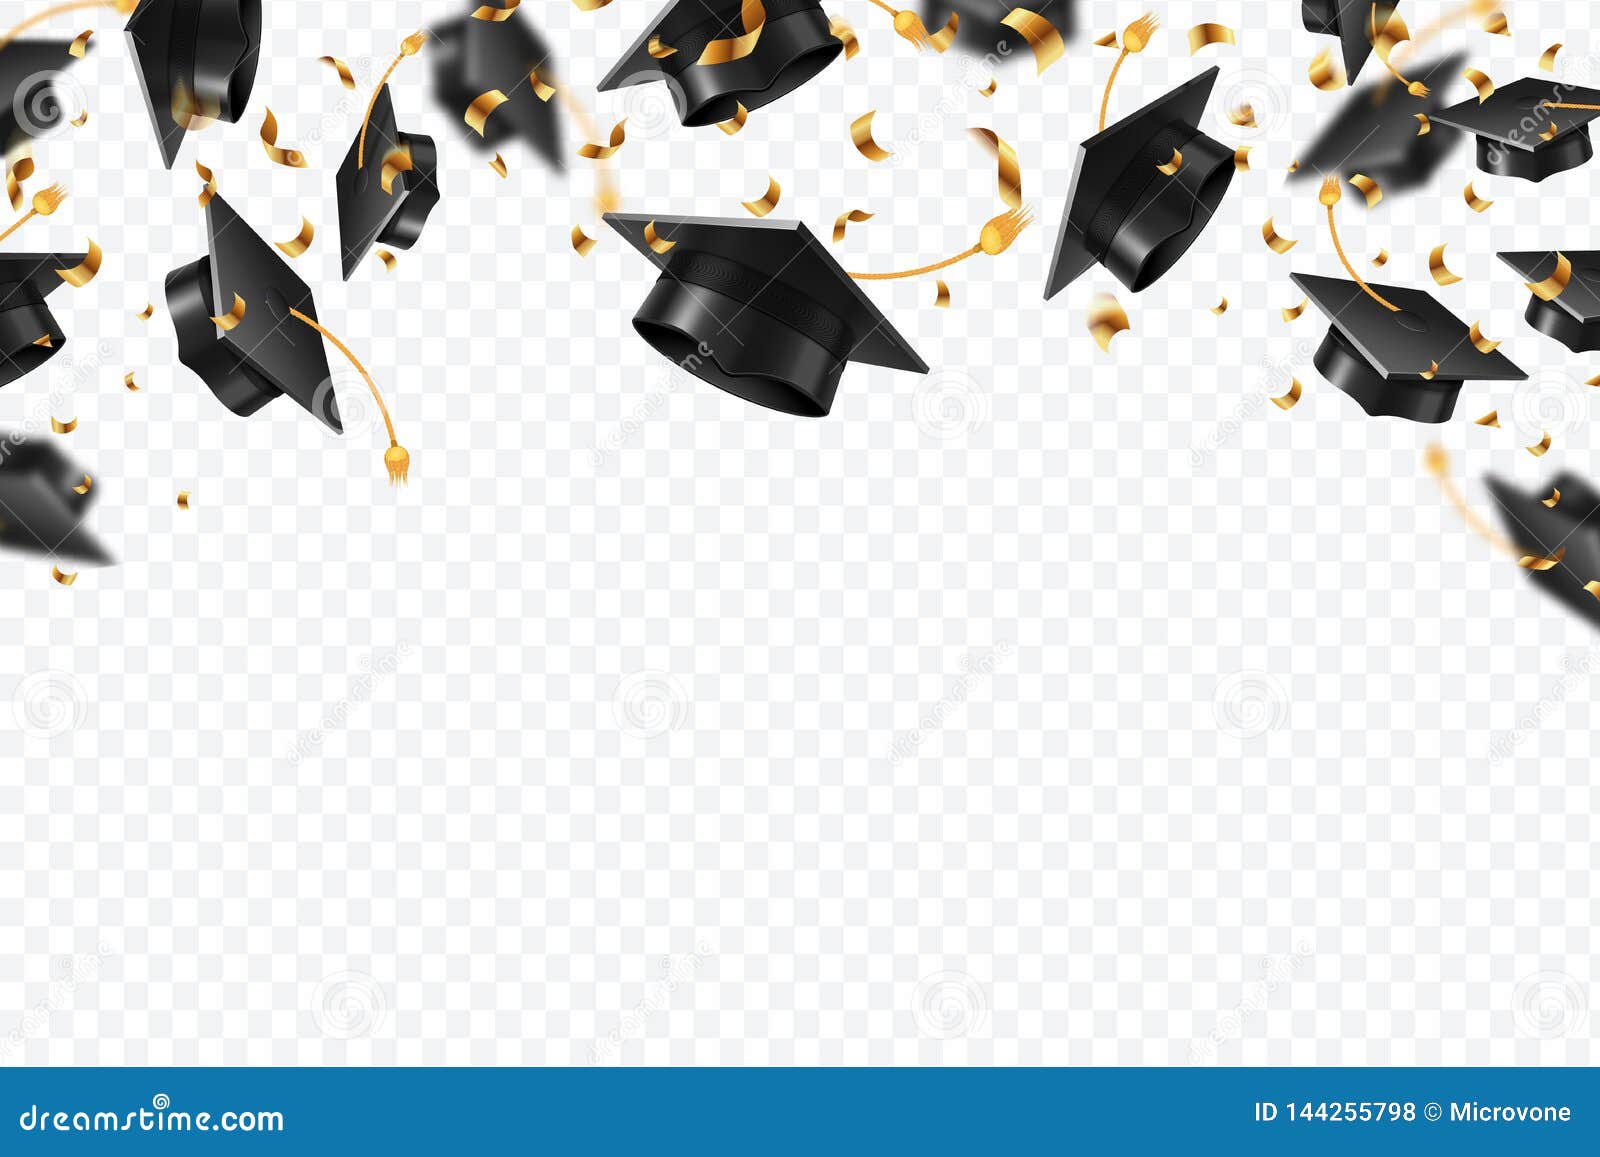 graduation caps confetti. flying students hats with golden ribbons . university, college school education 